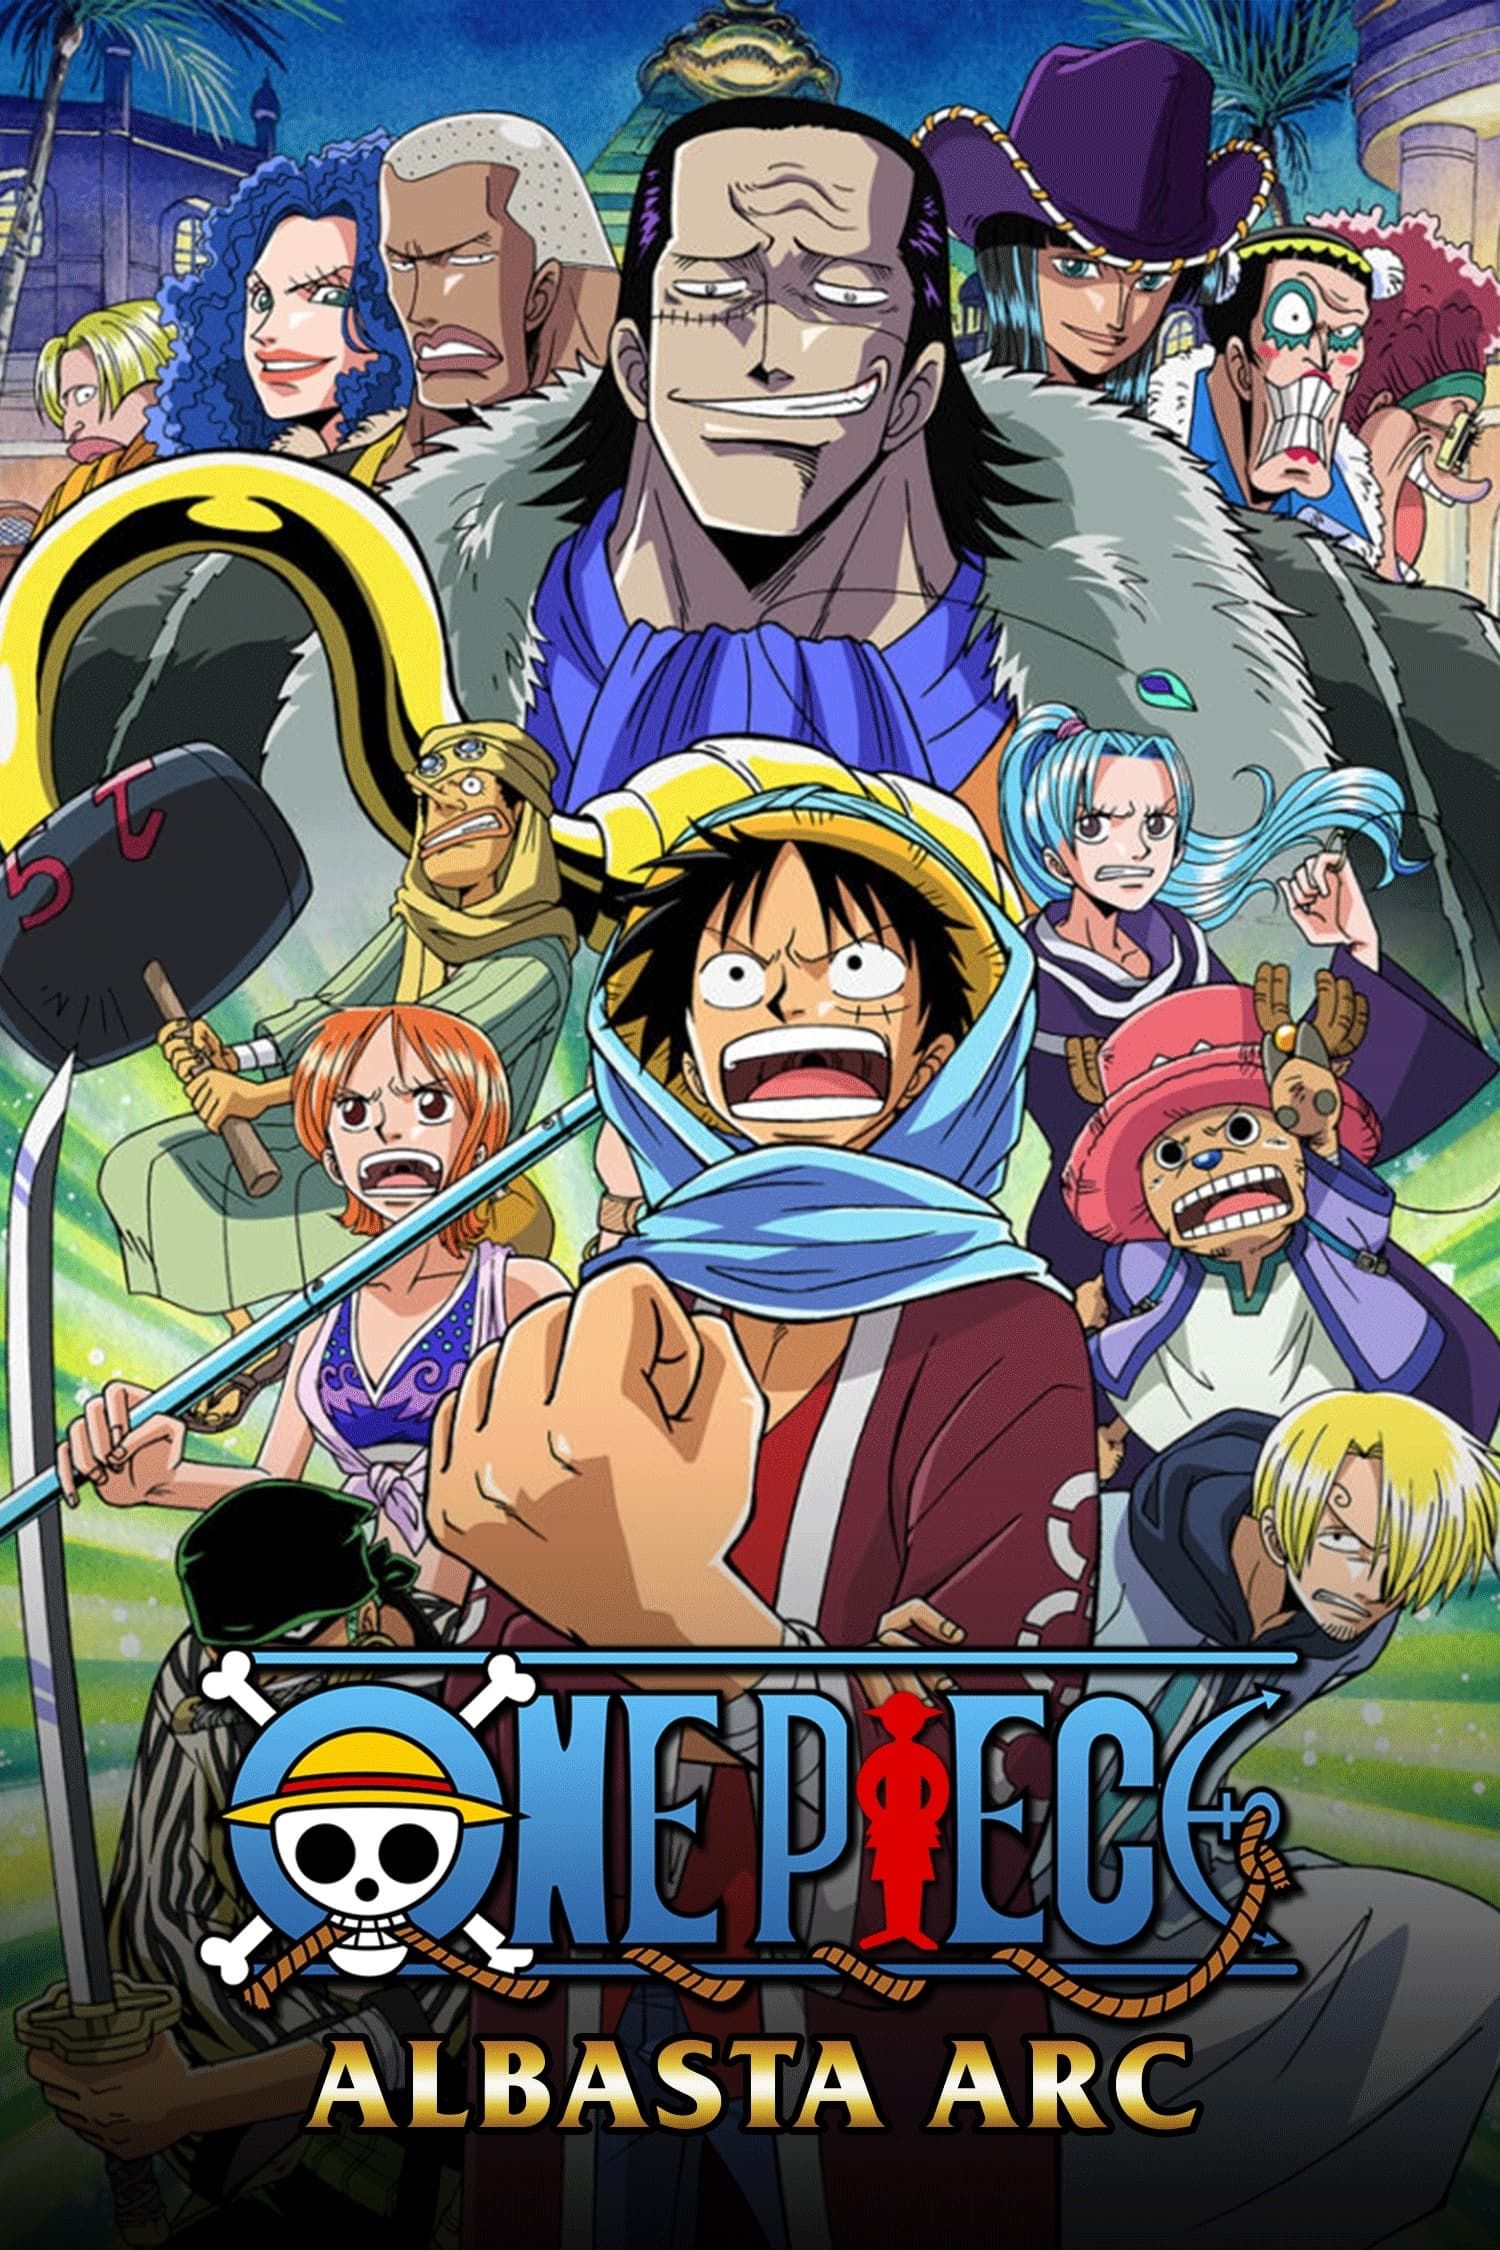 One Piece: Heart of Gold streaming: watch online